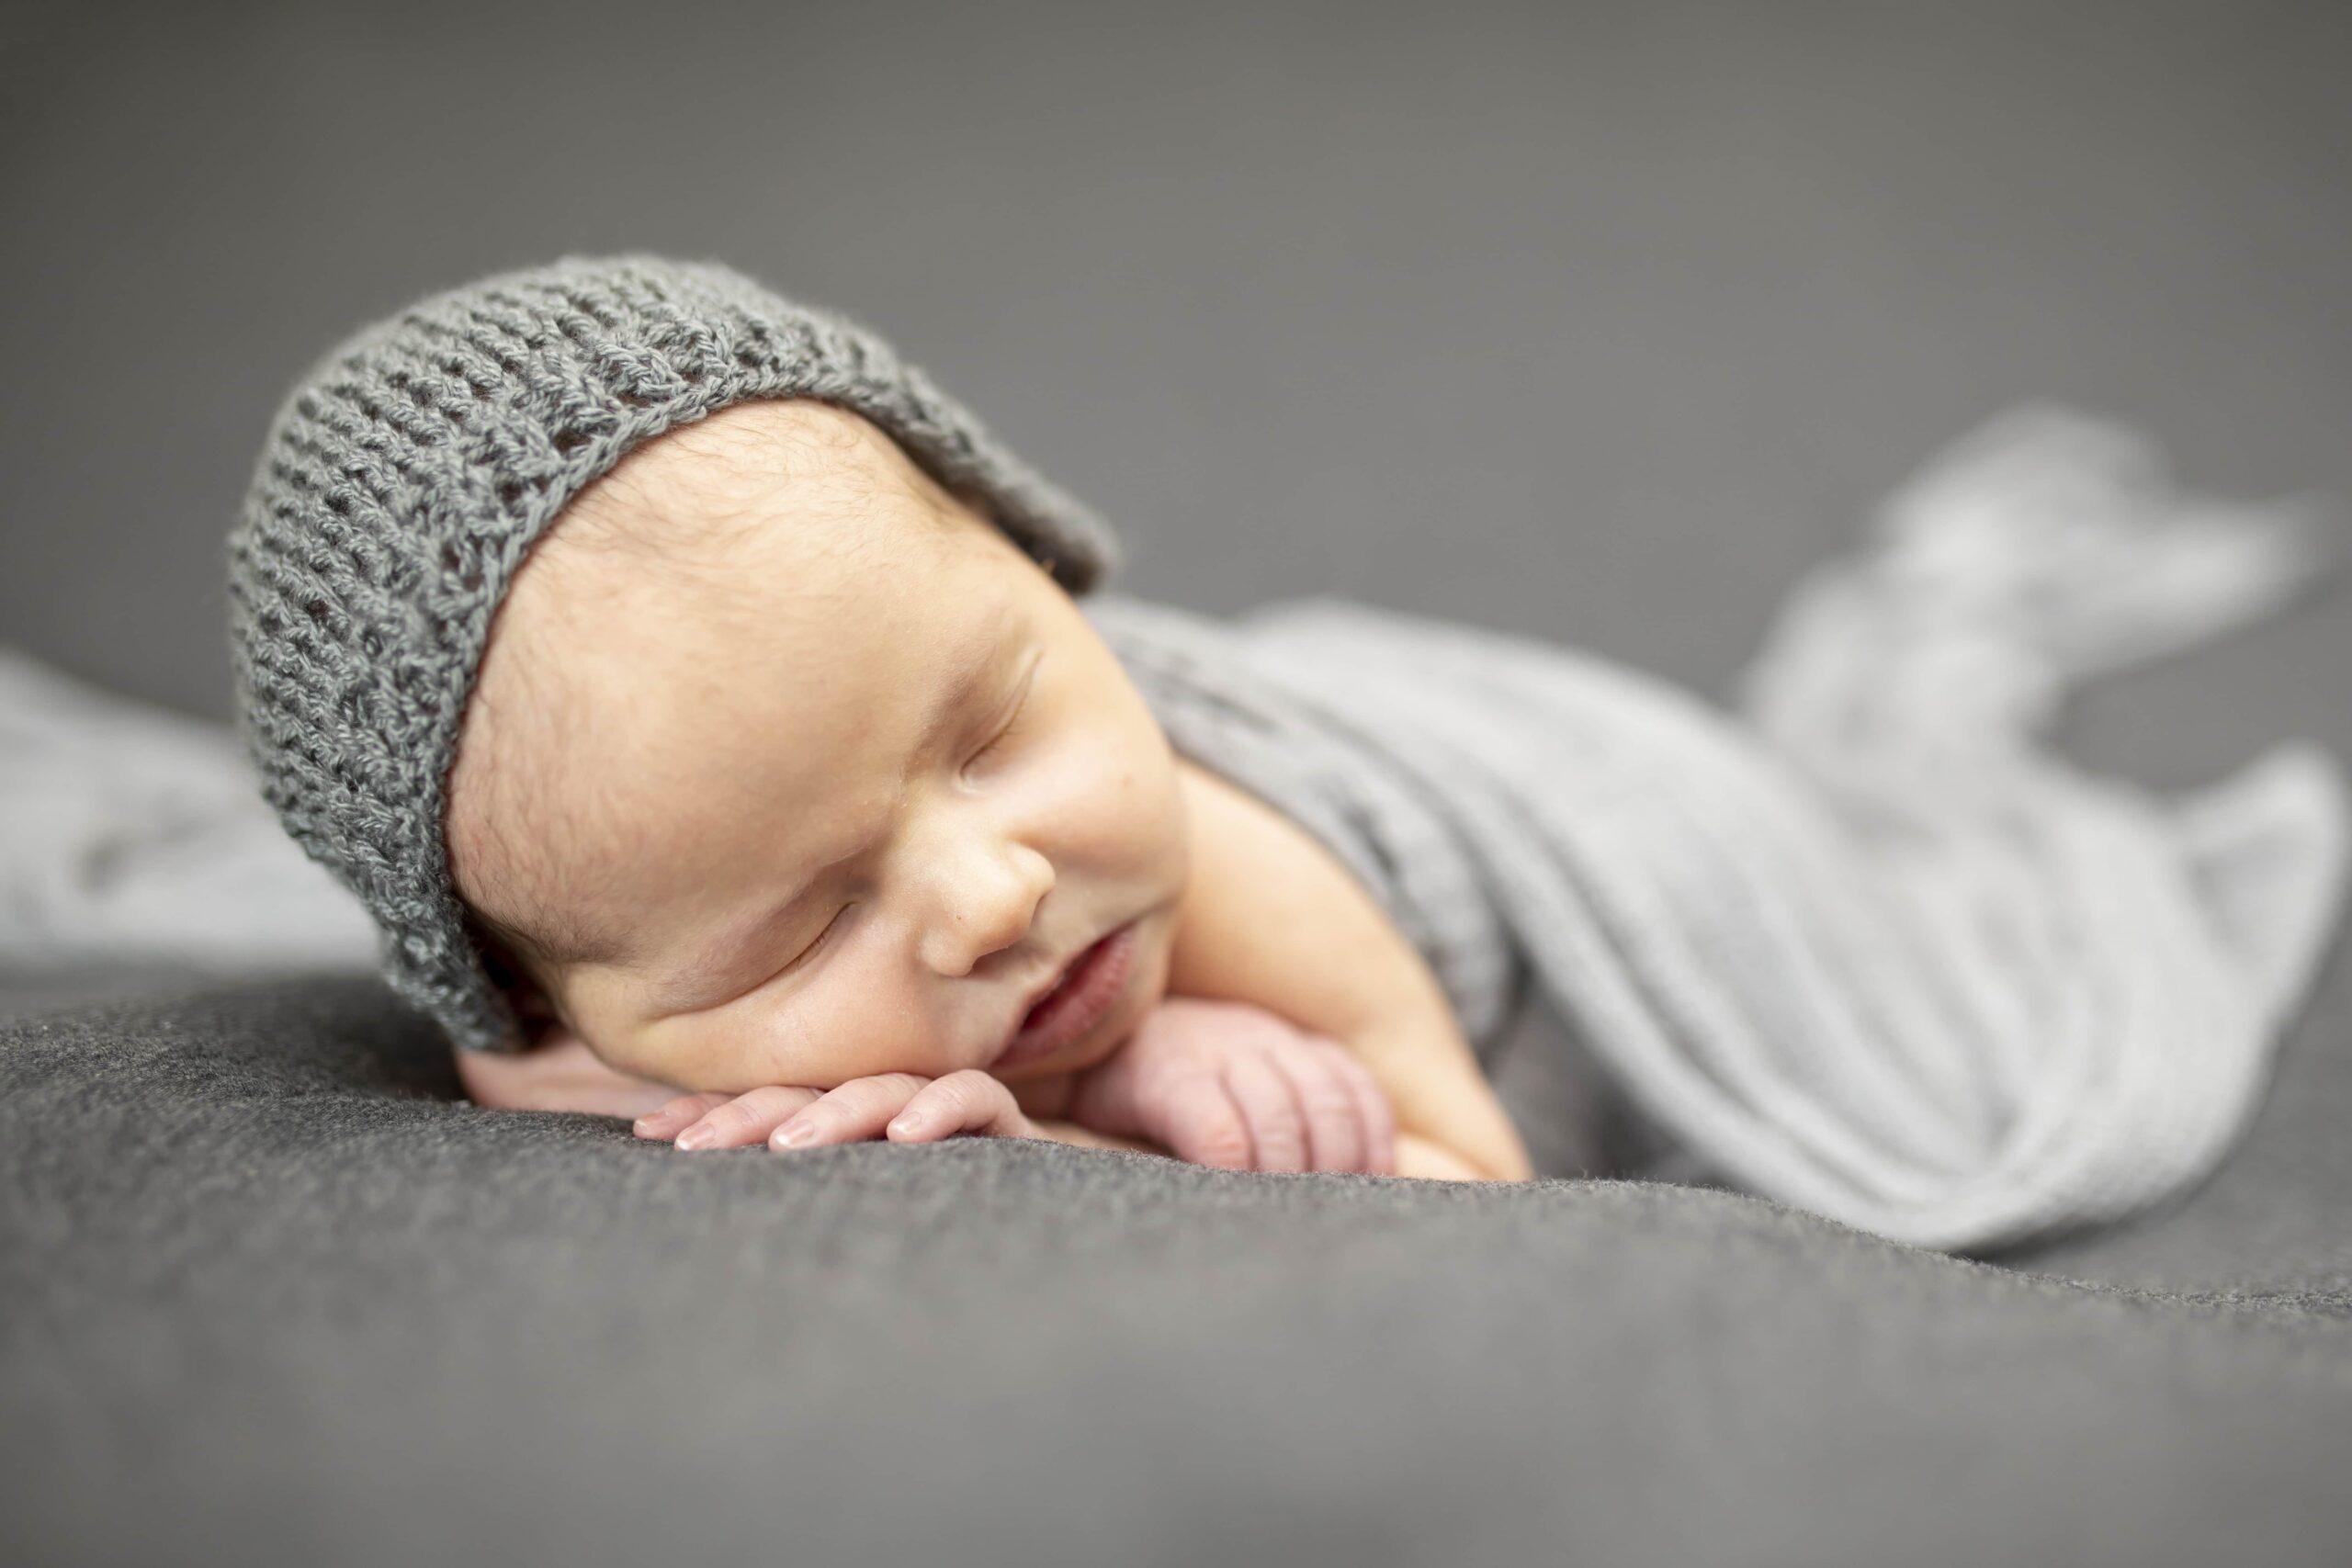 newborn sleeping on a gray backdrop with a gray bonnet on his head